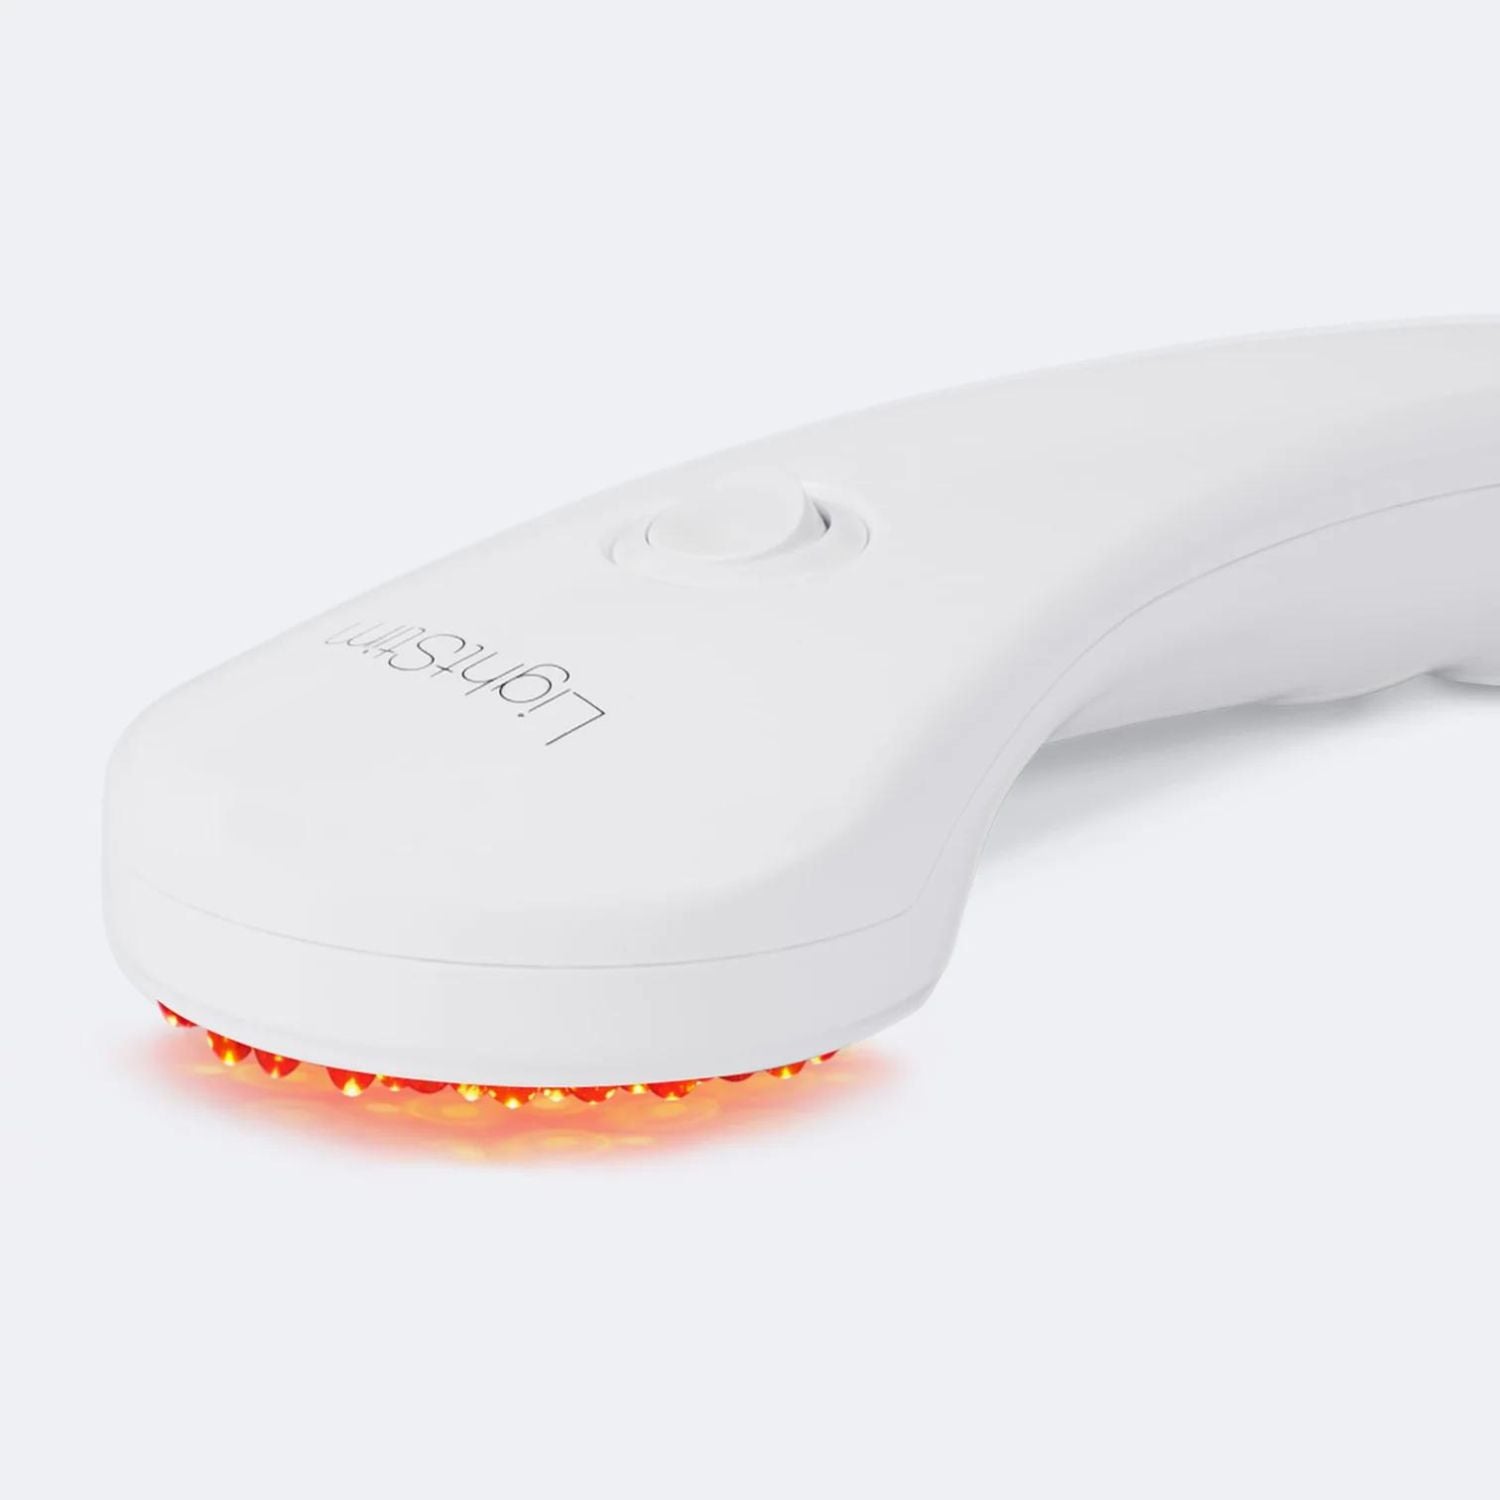 lightstim-infrared-hand-held-light-therapy-back-view